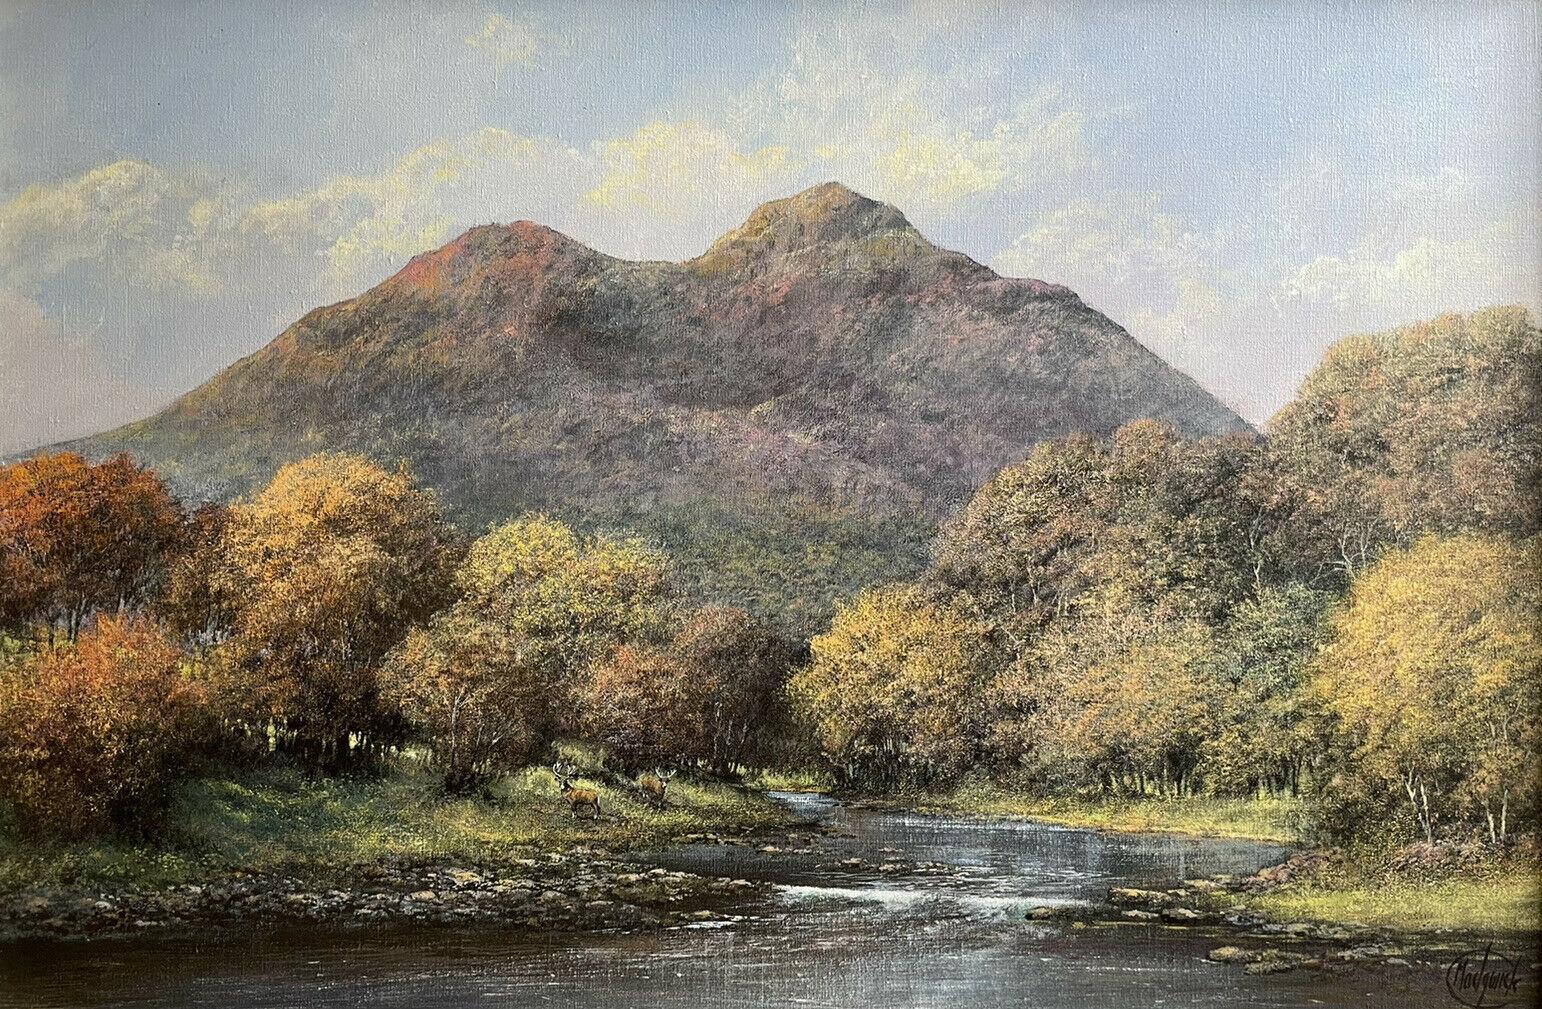 CLIVE MADGWICK (1934-2005) SIGNED OIL - STAGS SCOTTISH HIGHLAND RIVER LANDSCAPE - Painting by Clive Madgwick